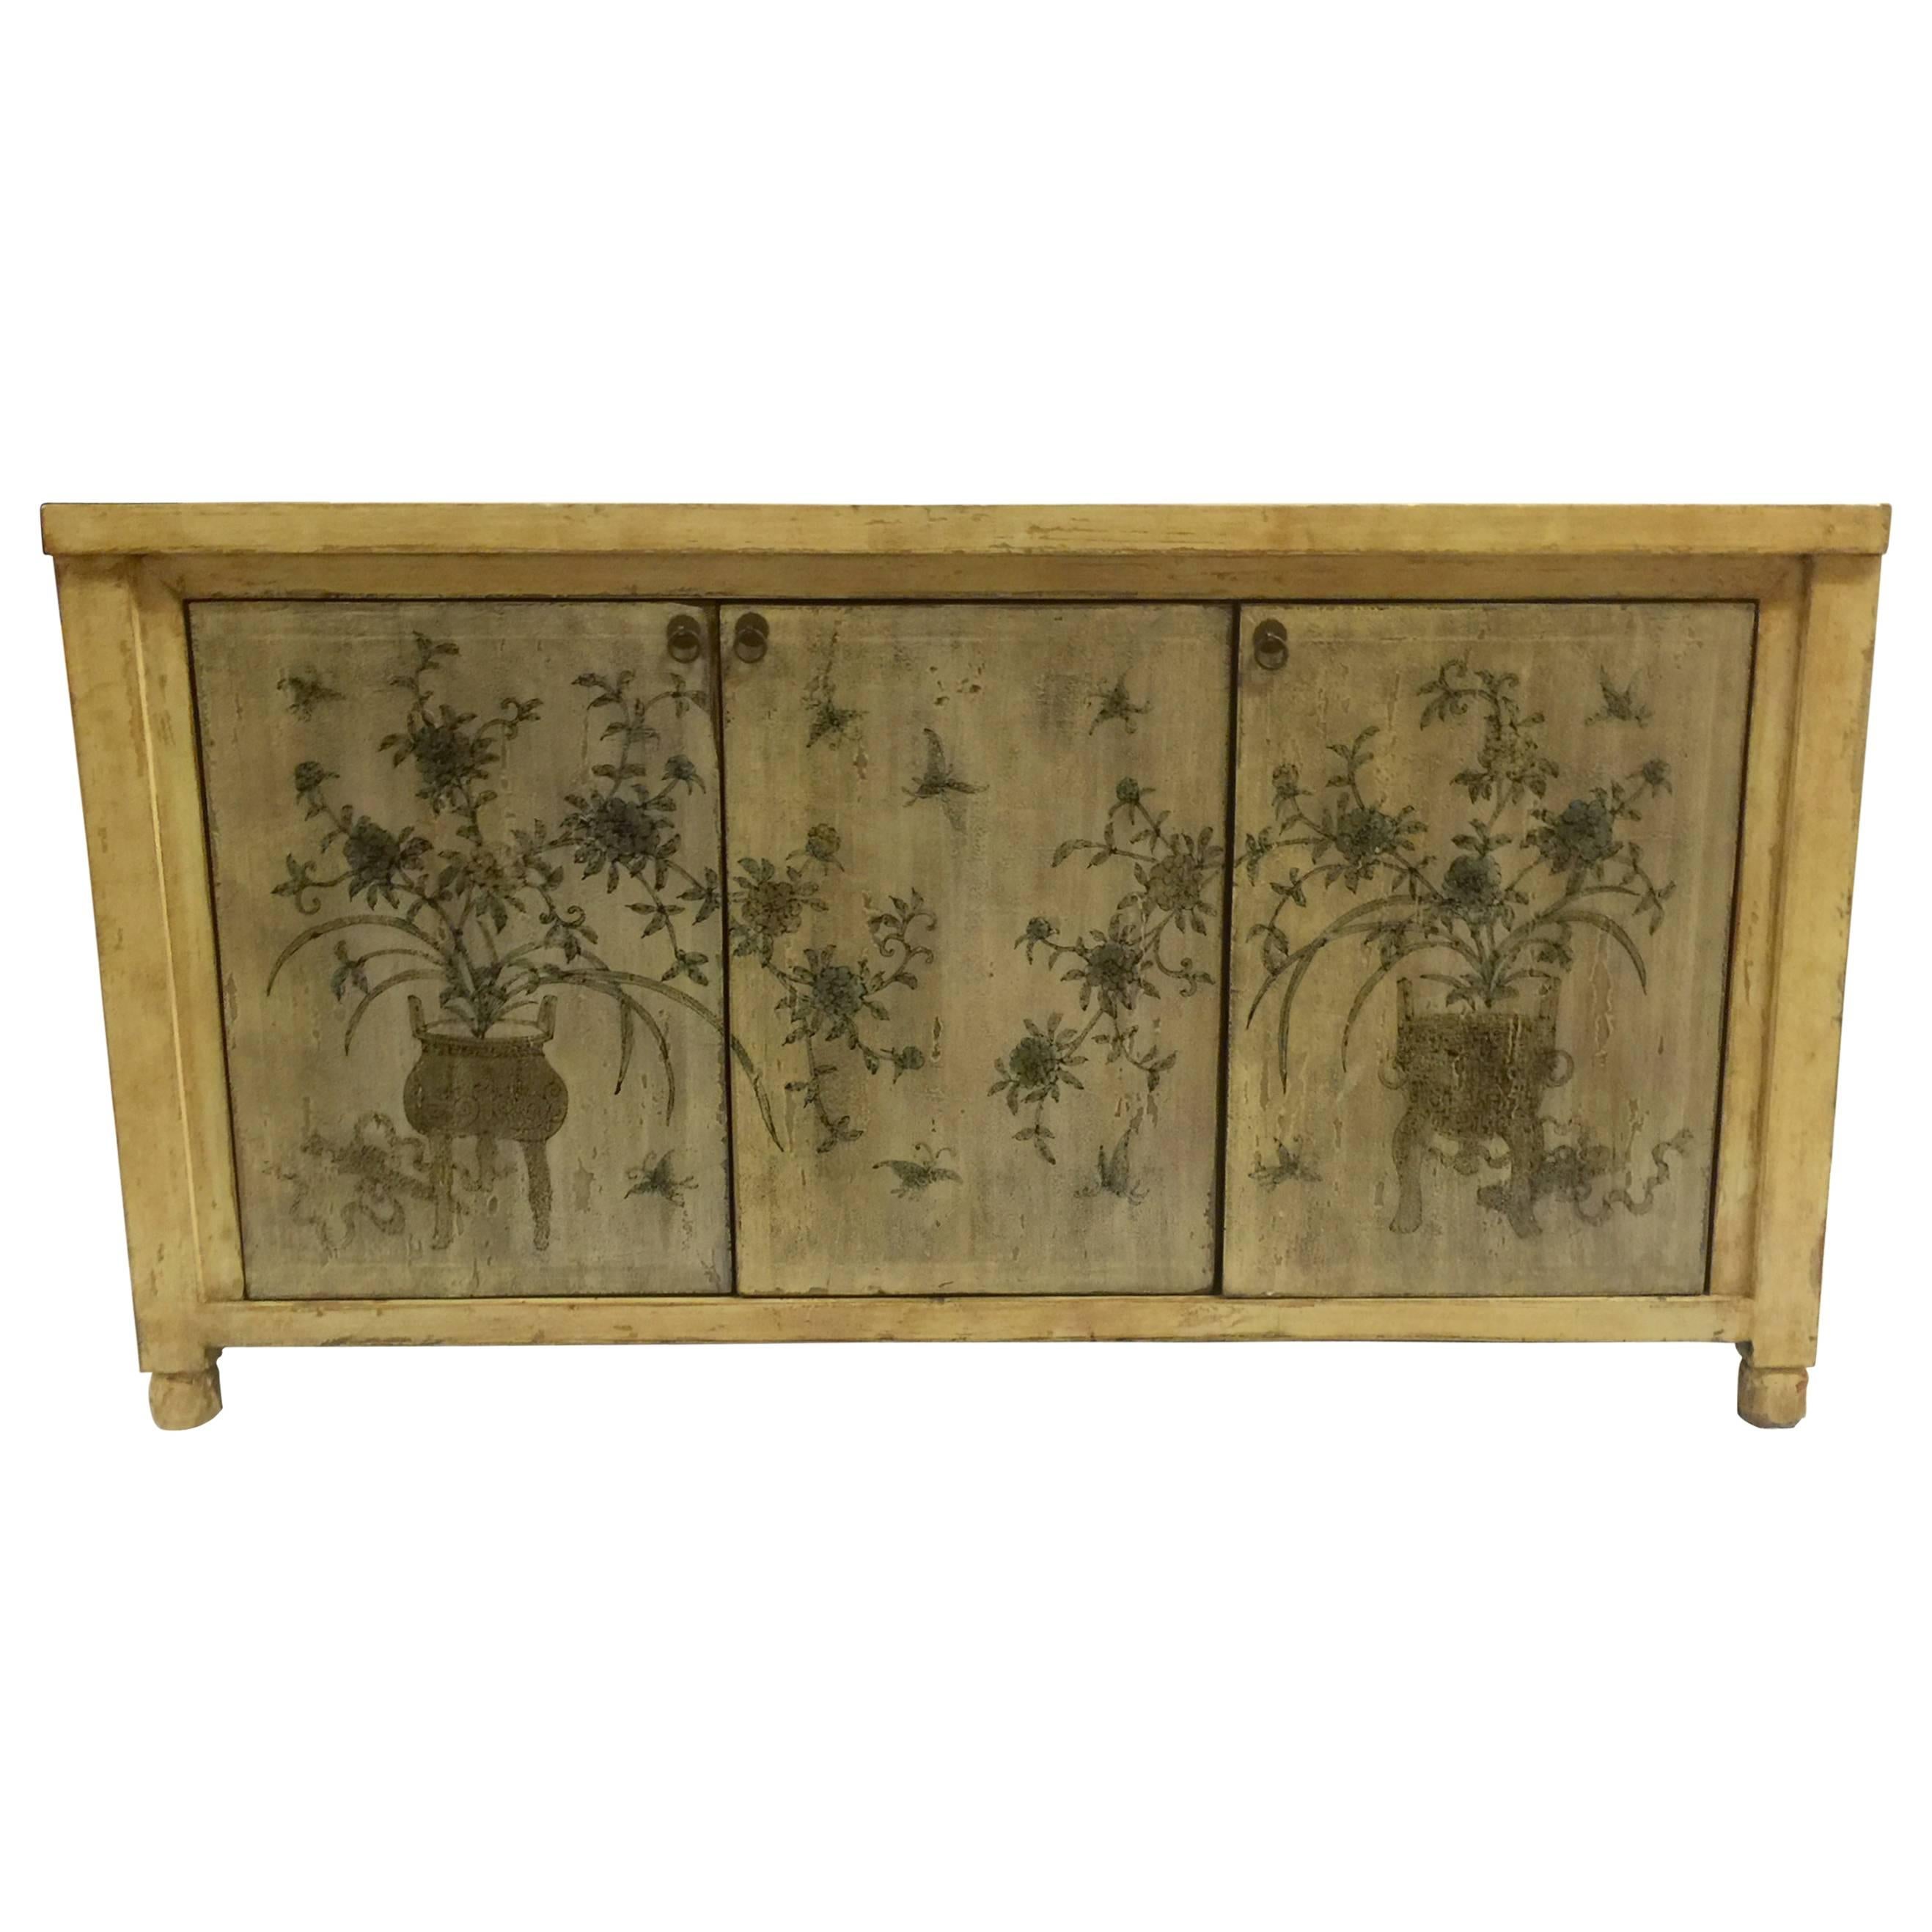 Asian Style Credenza with Floral Motif Hand-Painted Door Panels